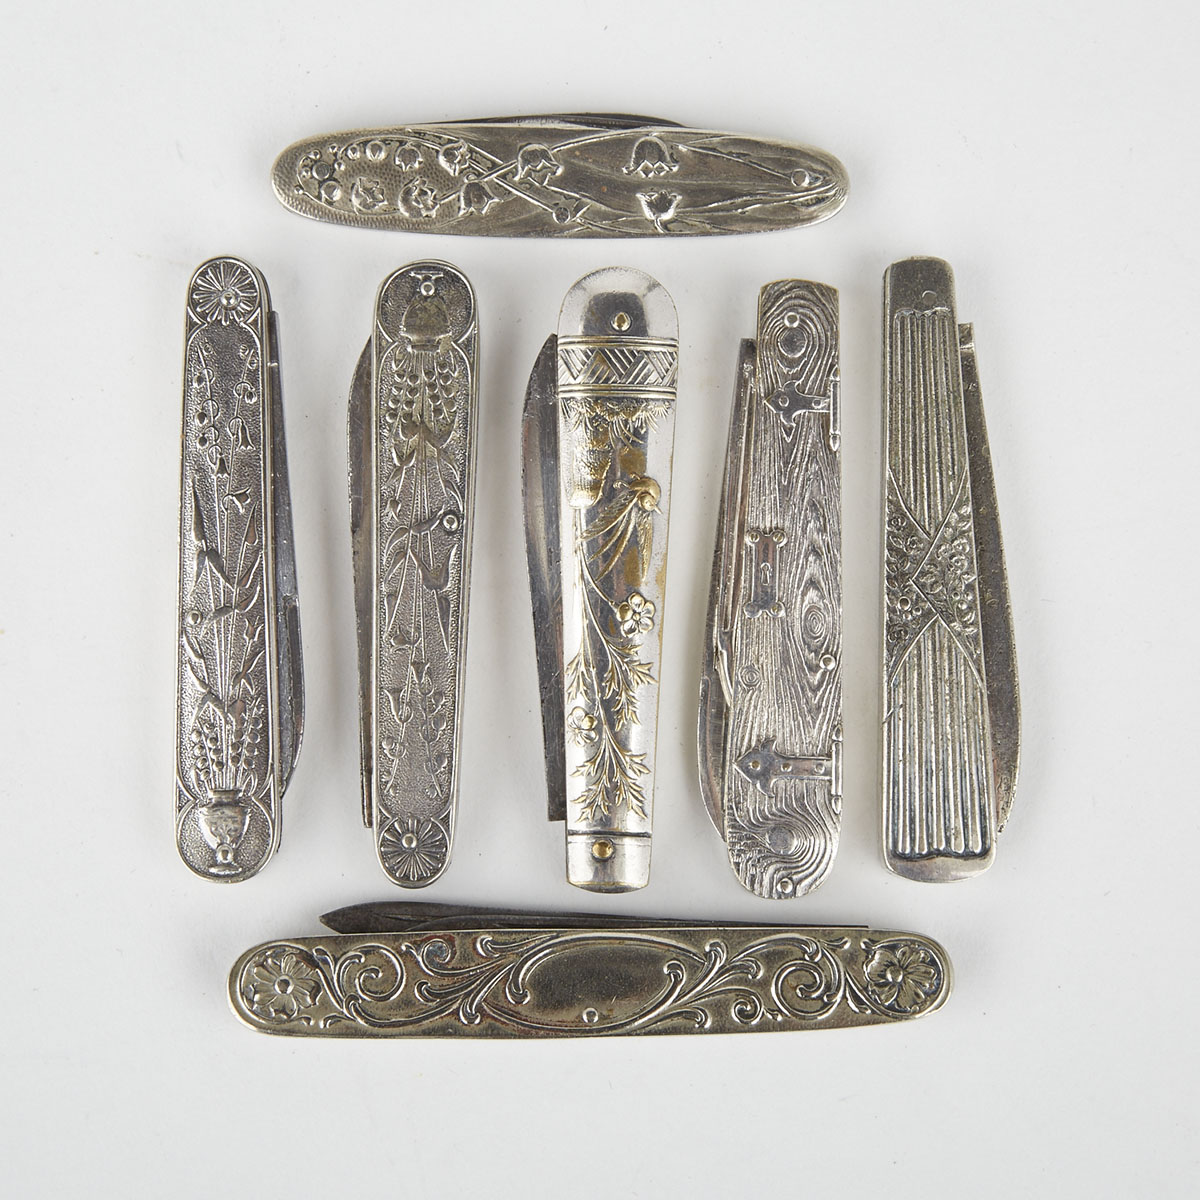 Seven American Silver Plated Pocket Knives, late 19th century